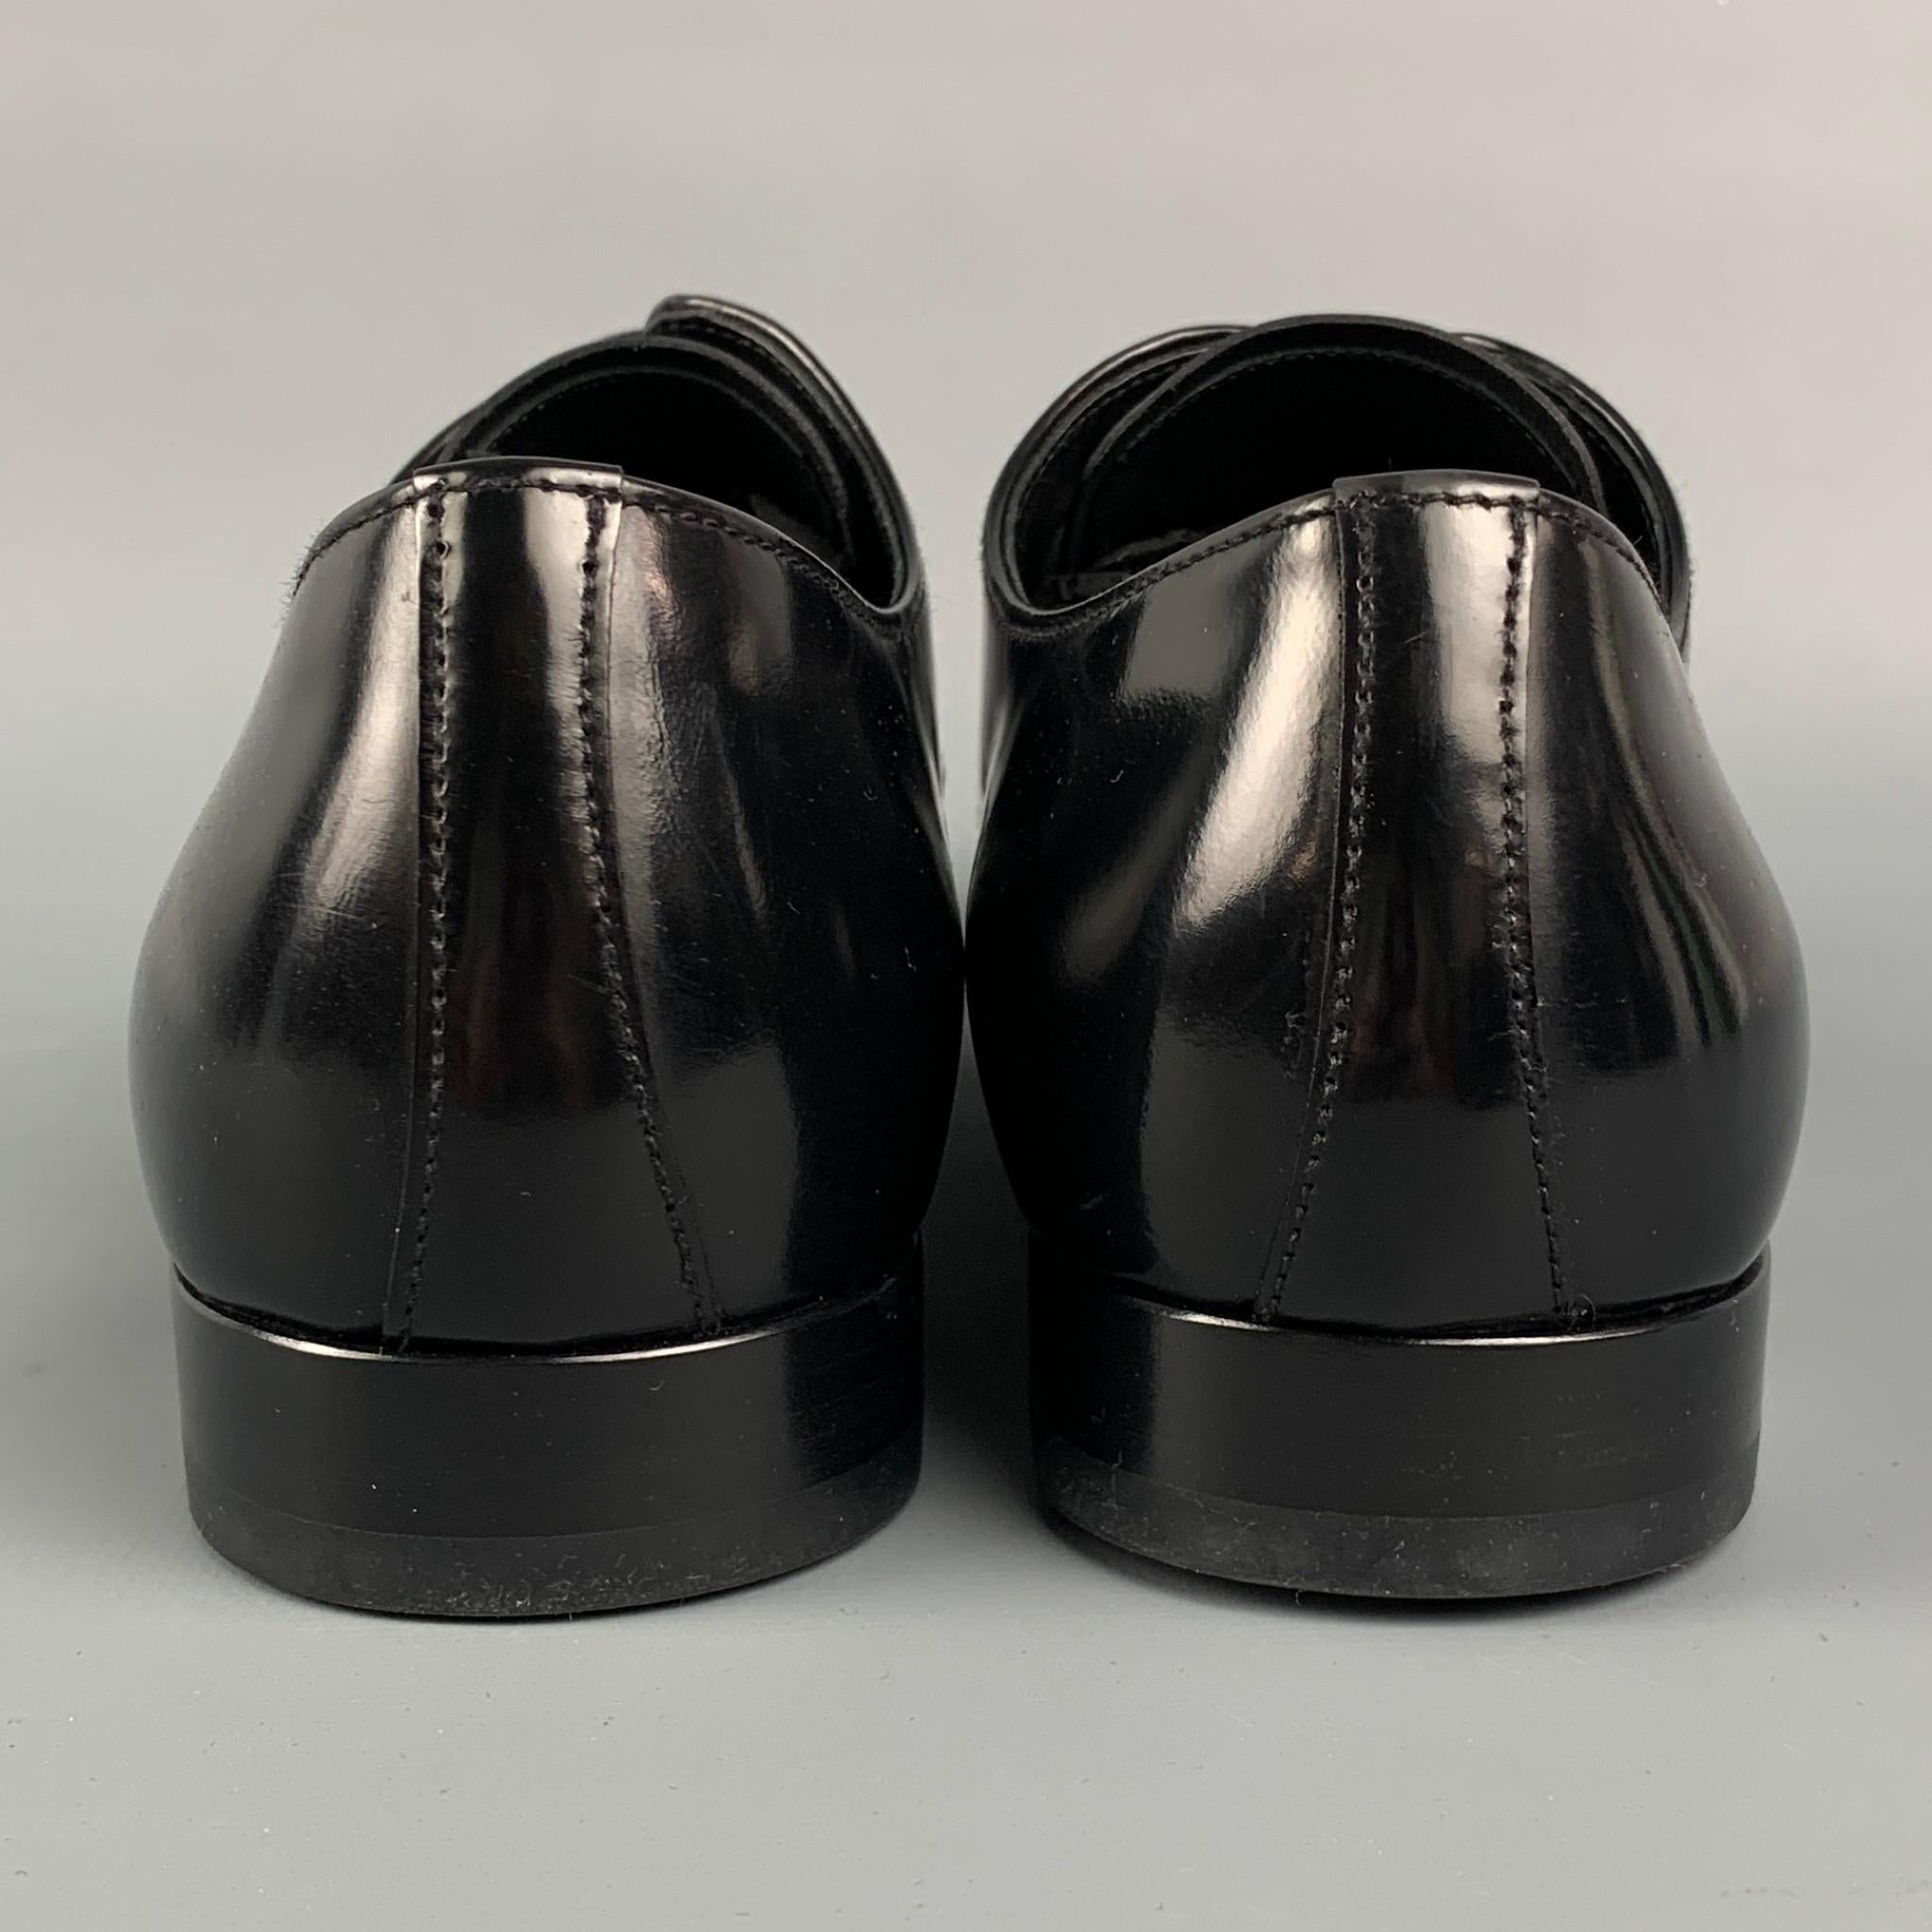 PRADA Size 7 Black Patent Leather Oxford Lace Up Shoes 1